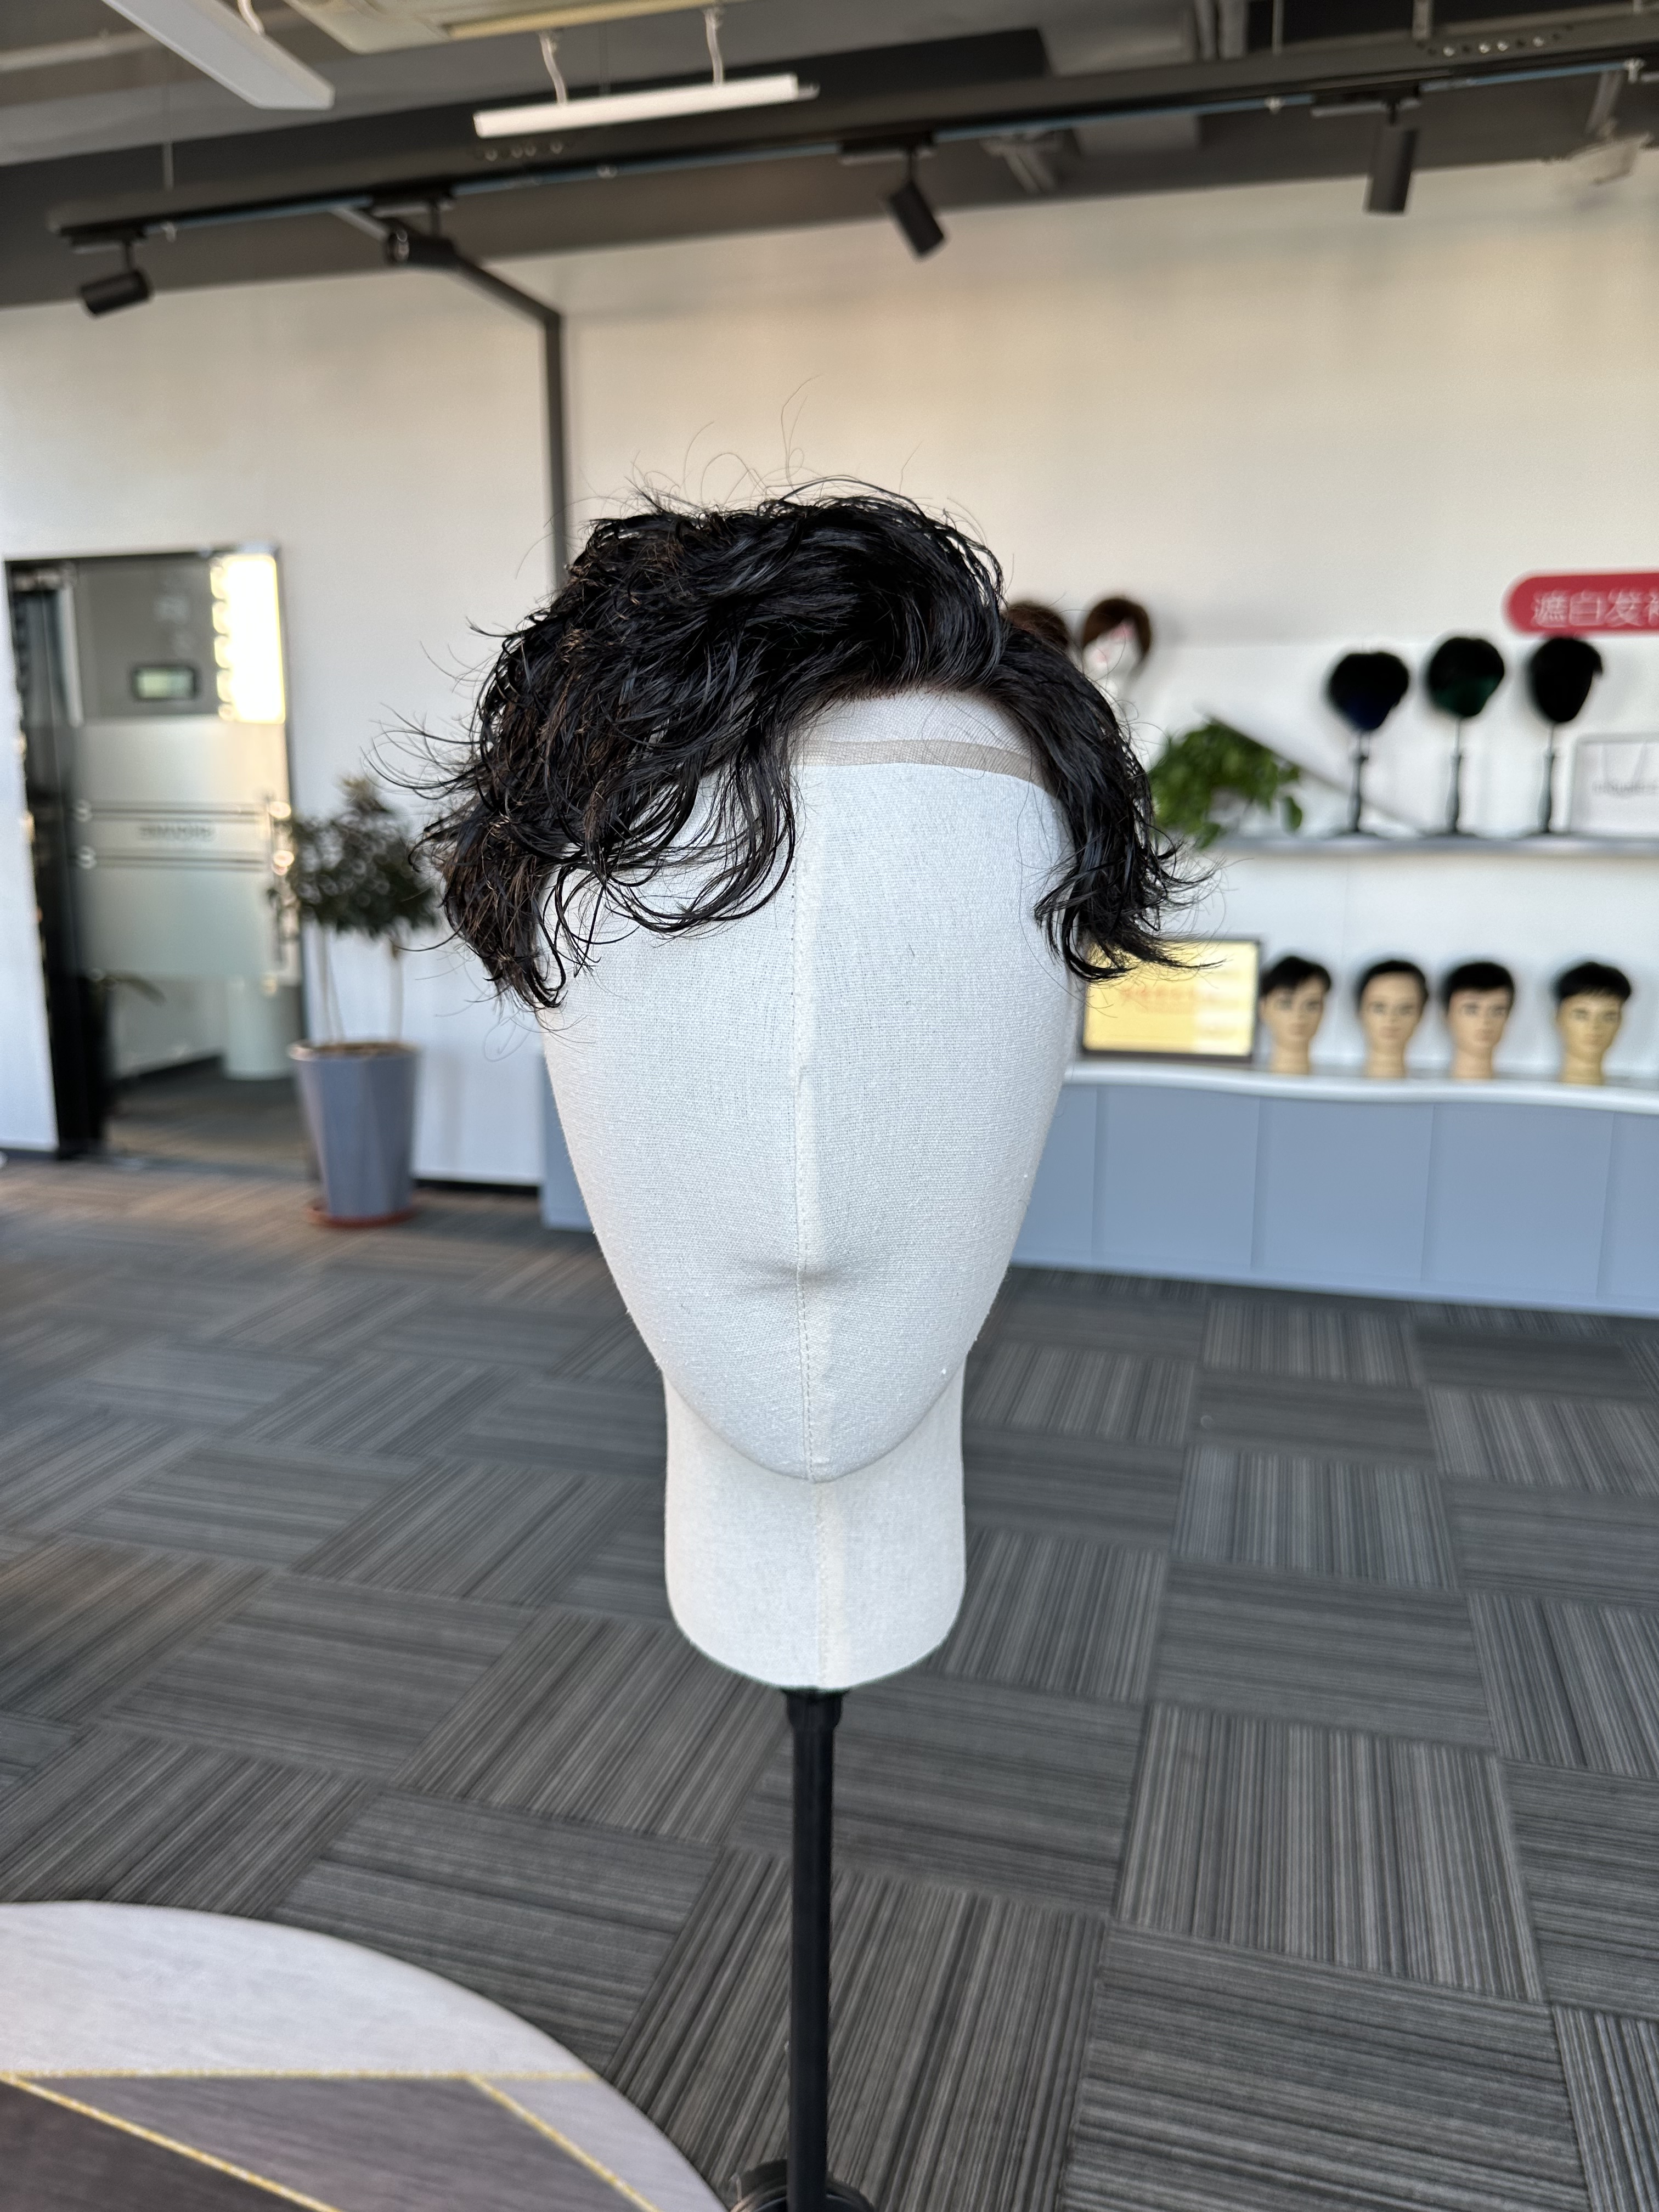 Wear To Go Natural Human Hair Systems With 28MM Curly Hairstyle For Men Replacement Mens Hairpiece With Layered Haircuts For Balding Crown